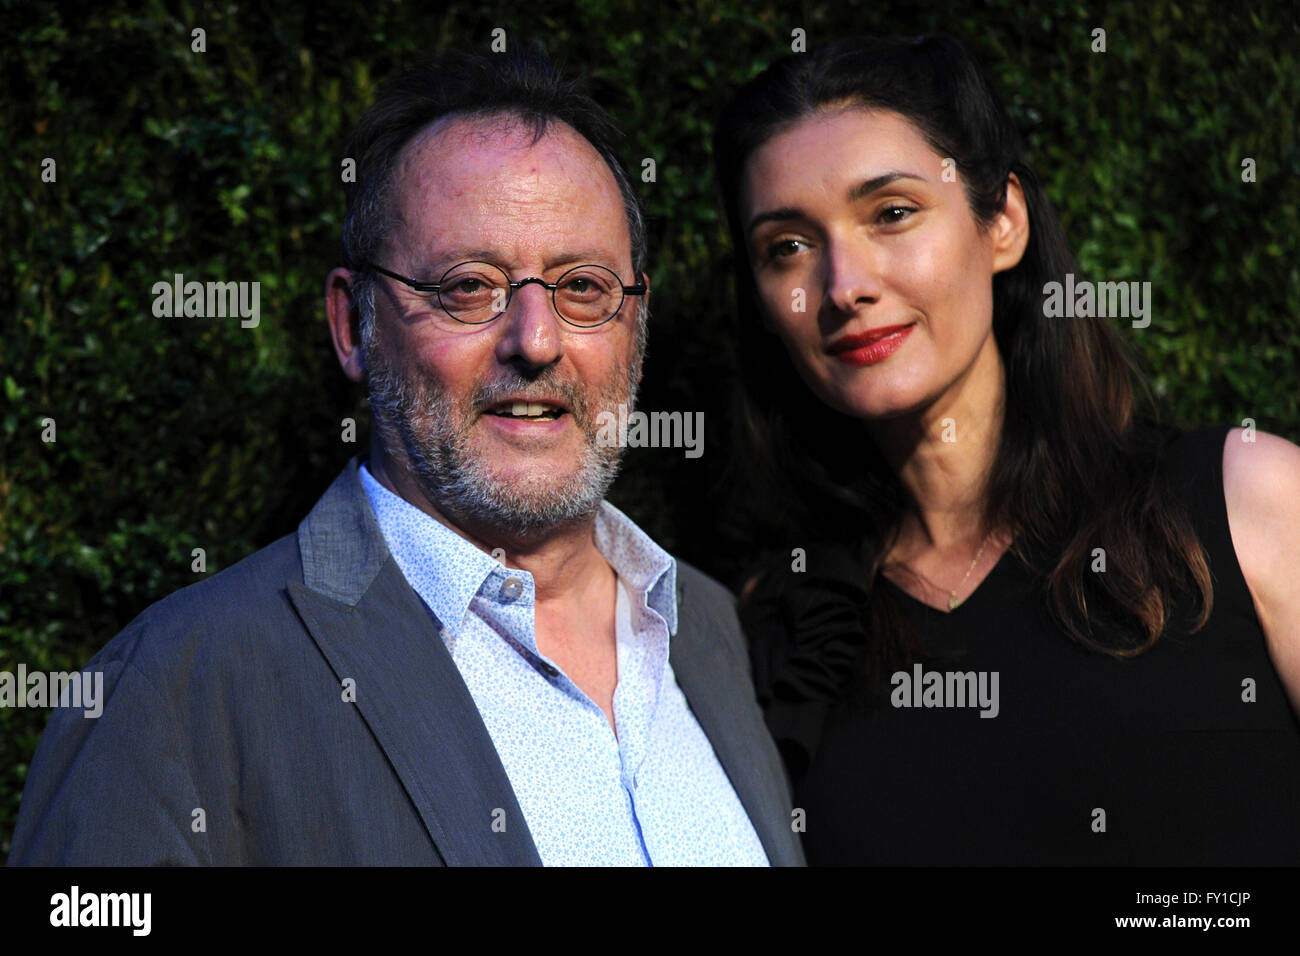 New York City. 18th Apr, 2016. Jean Reno and Nathalie Dyszkiewicz attend the 11th Annual Chanel Tribeca Film Festival Artists Dinner at Balthazar on April 18, 2016 in New York City. © dpa/Alamy Live News Stock Photo